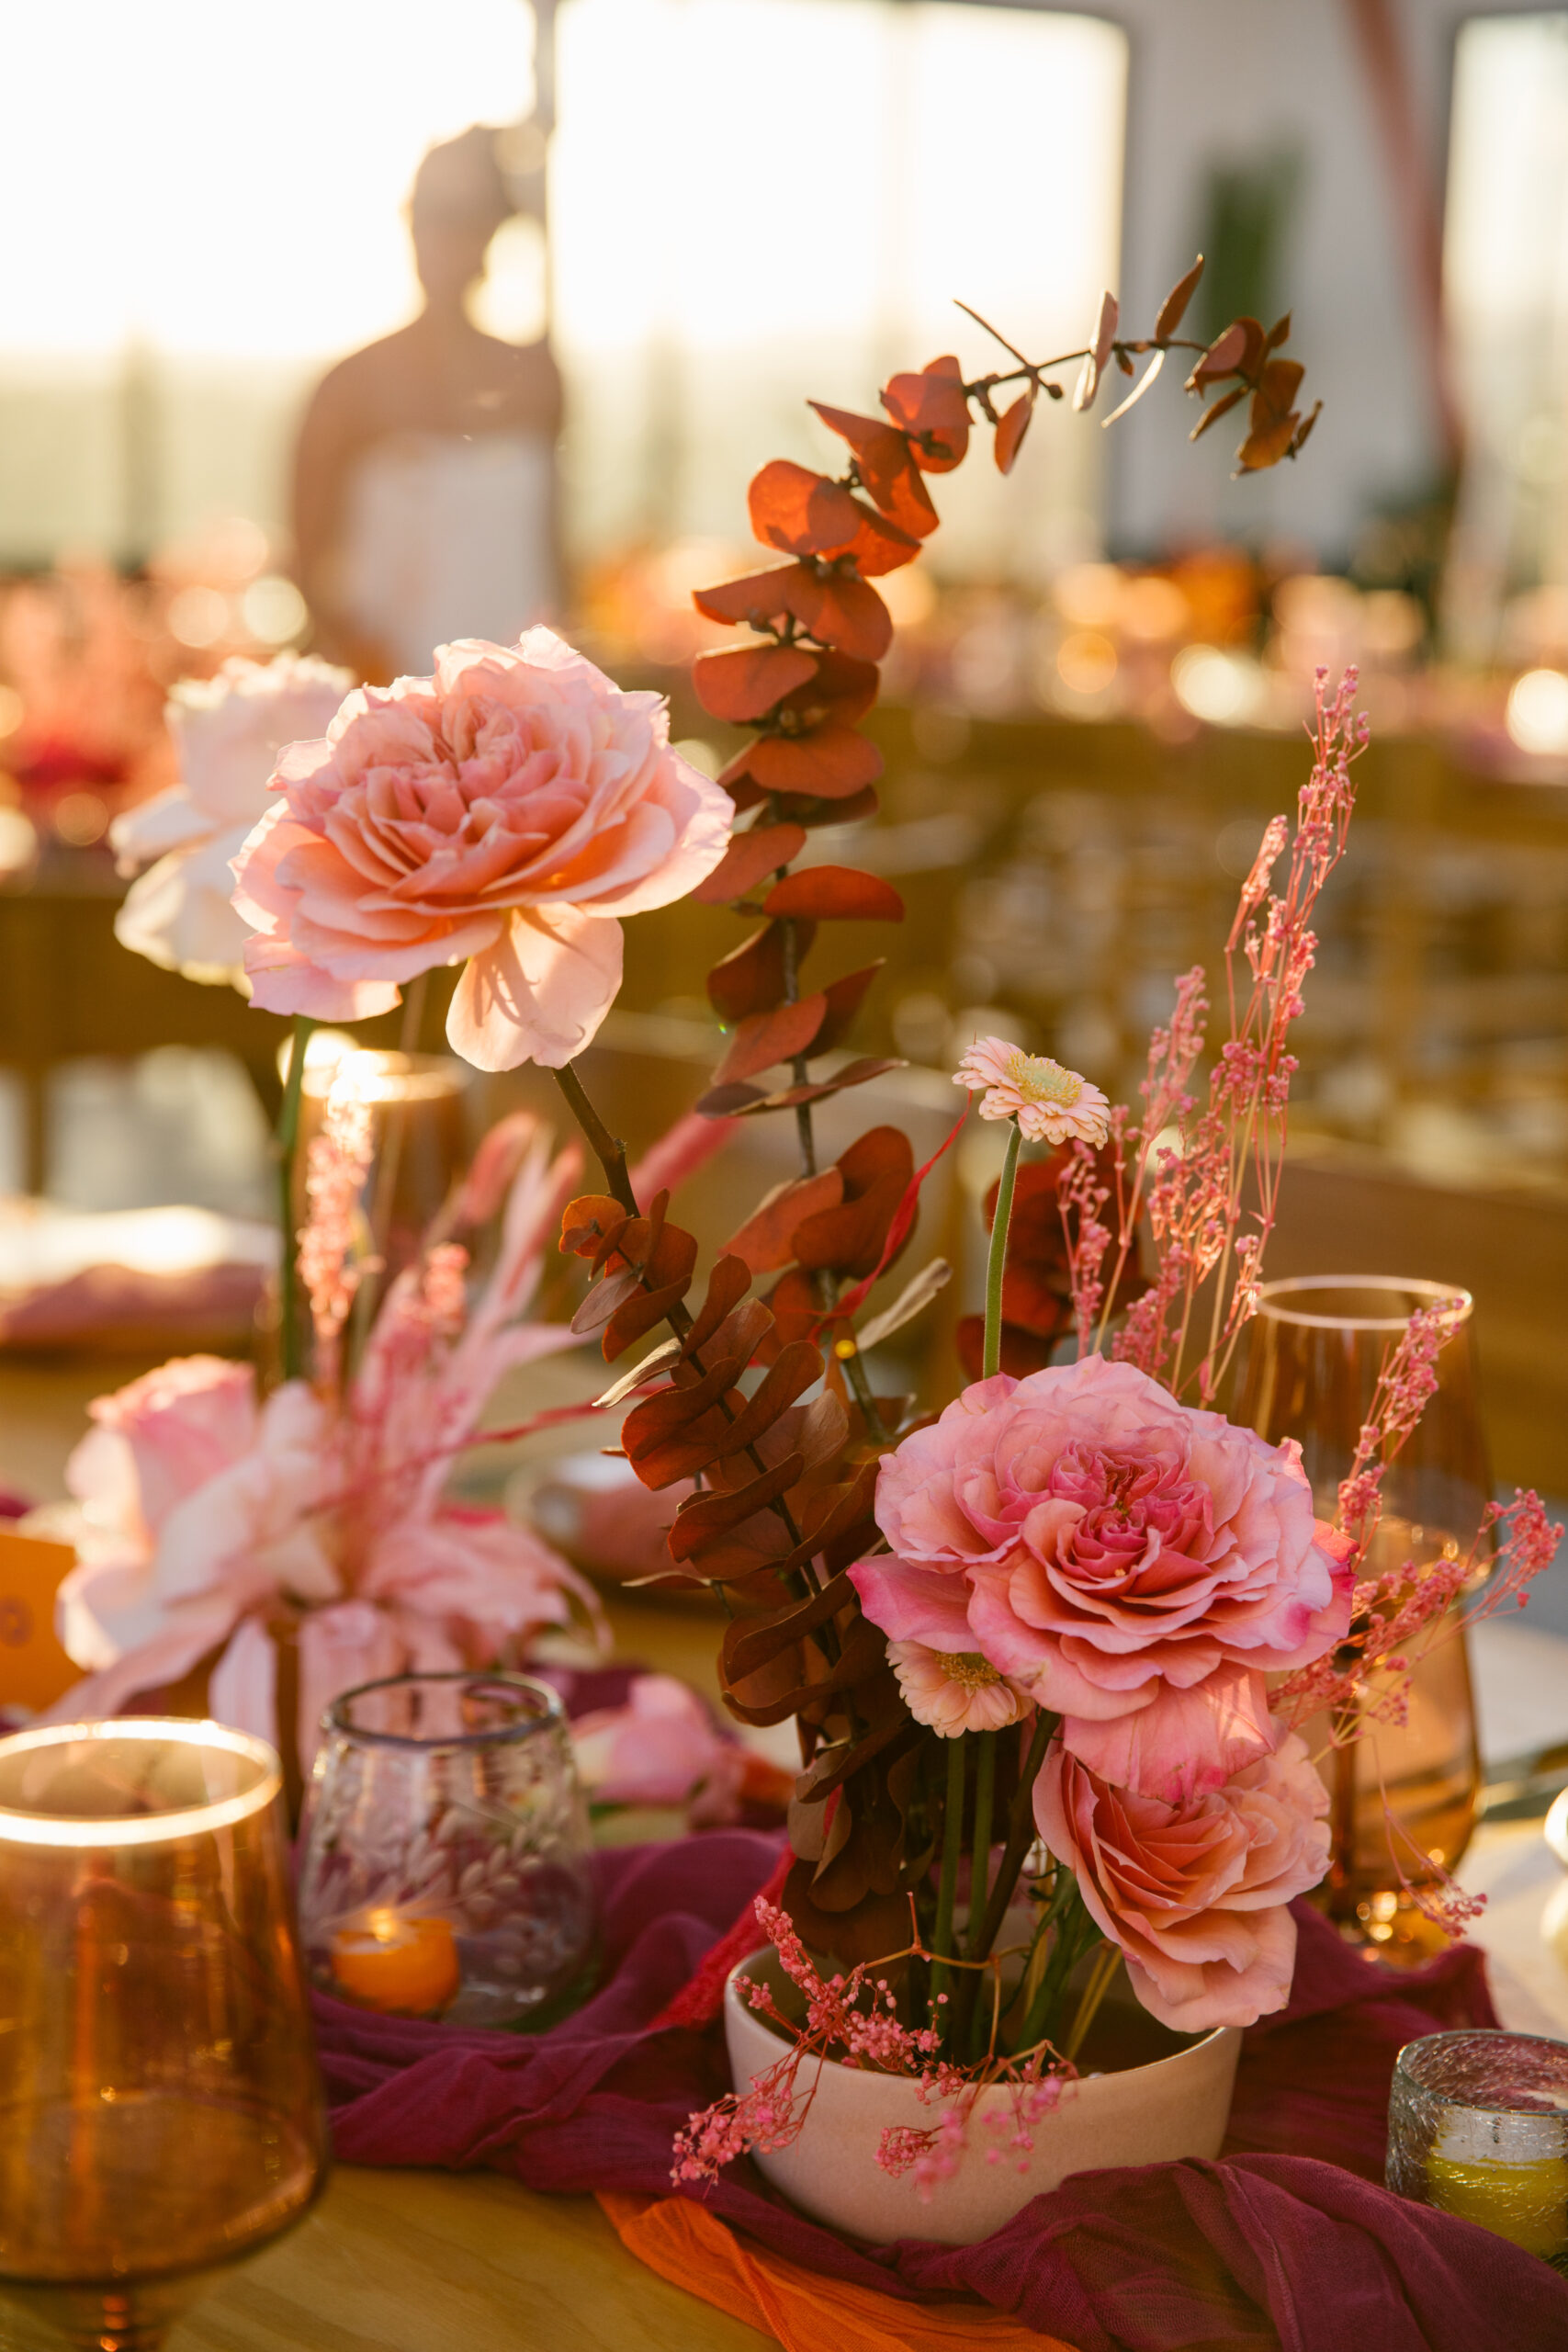 hotel el ganzo rooftop. colorful wedding florals. bright pinks, red, orange, yellow. fuchsia gauze runner on light wooden table with wooden chairs. smokey pink colored glassware. wedding reception tabletop. 
orange and pink custom table number signs.  mauve clay handmade plates. gold flatware. dusty rose pink gauze napkin. small clear pleated candle votives with colored candles. bride out of focus in background.